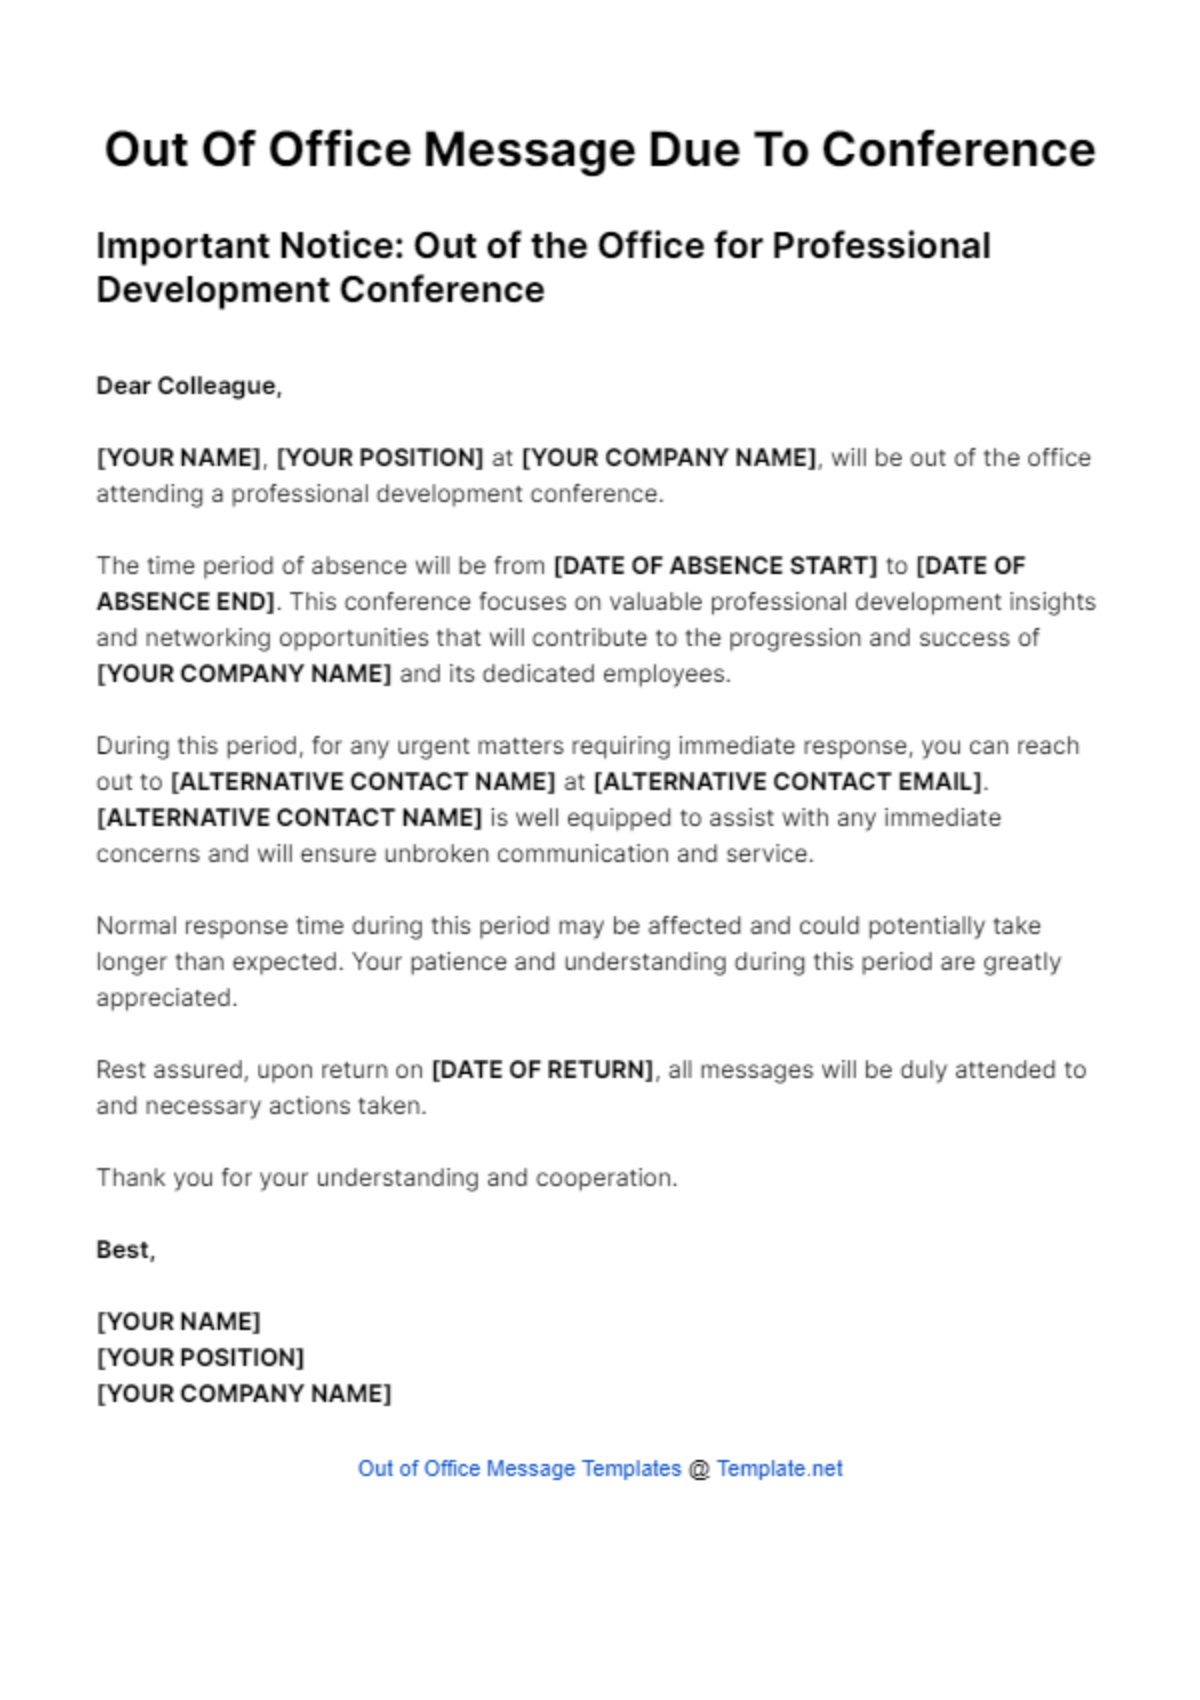 Out Of Office Message Due To Conference Template